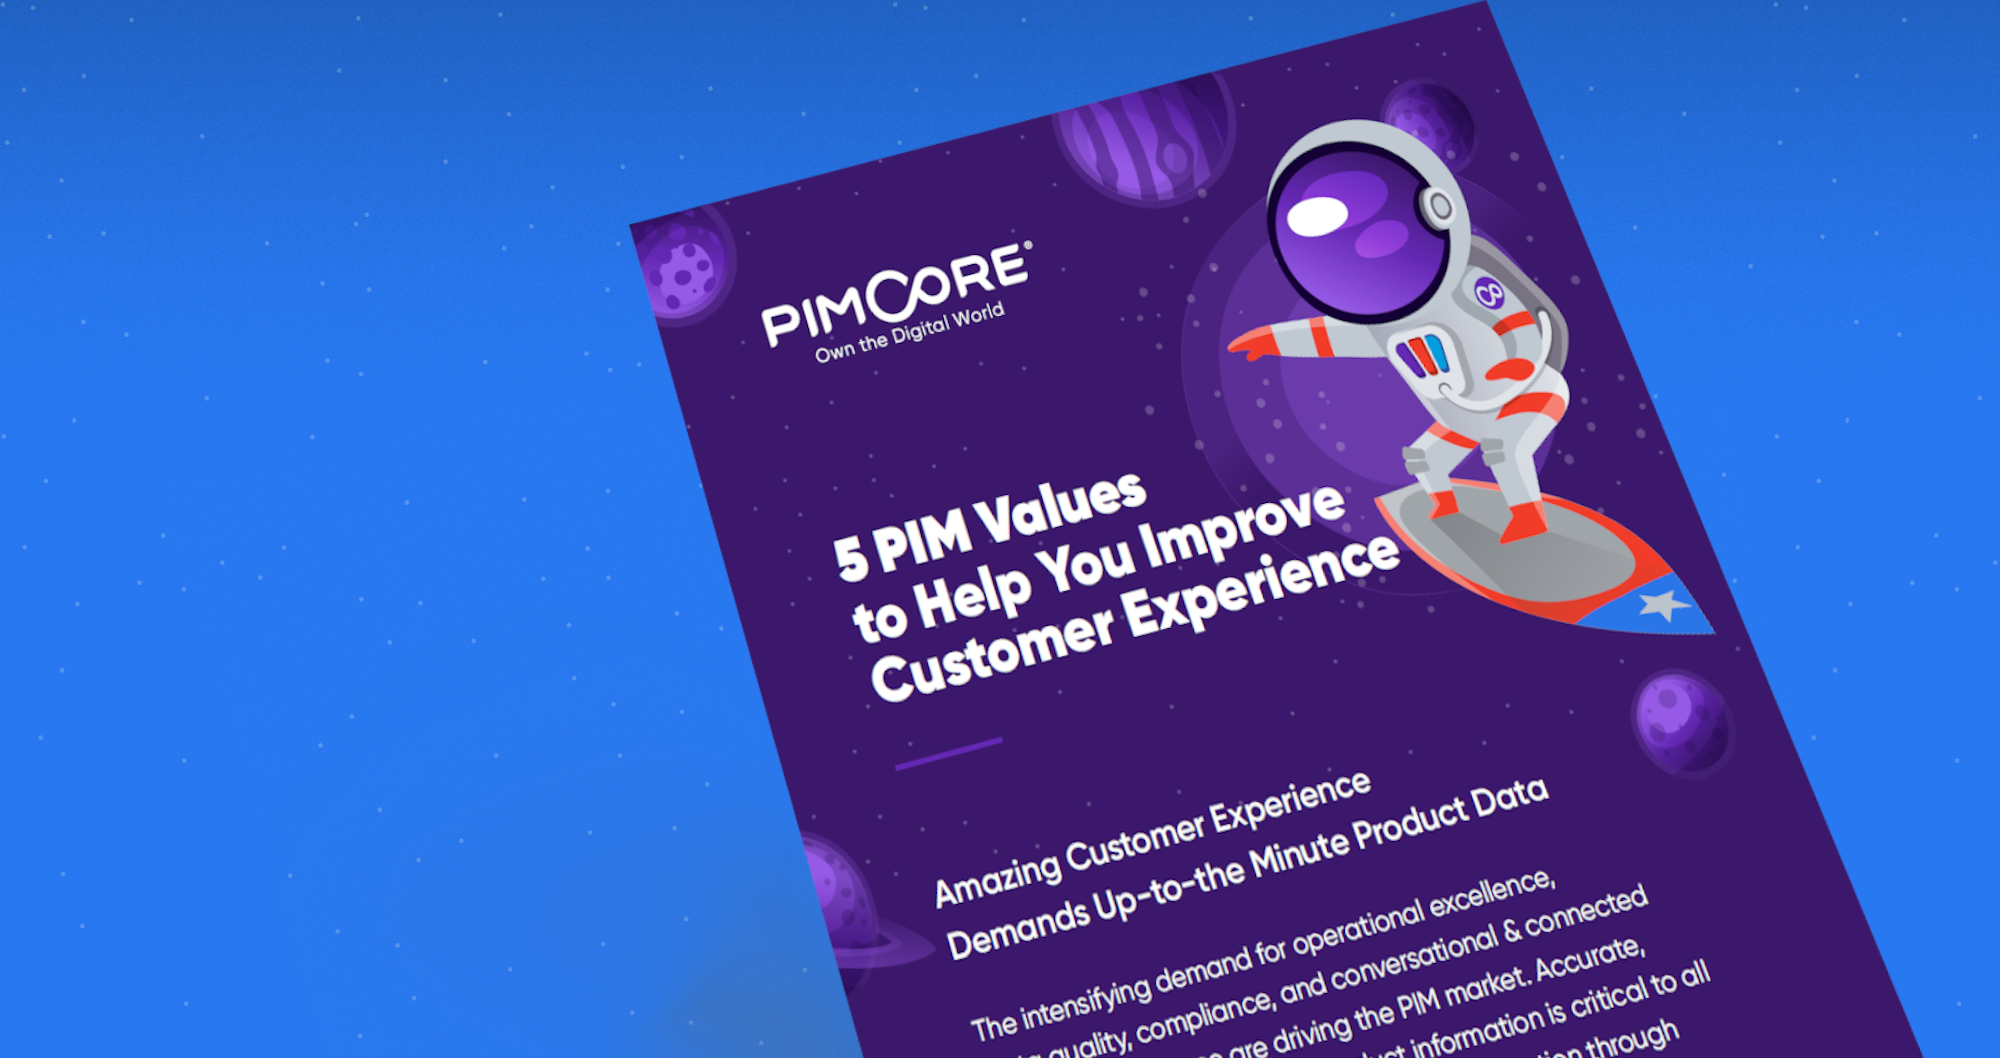 5 Product Information Management (PIM) Values to Help You Improve Customer Experience